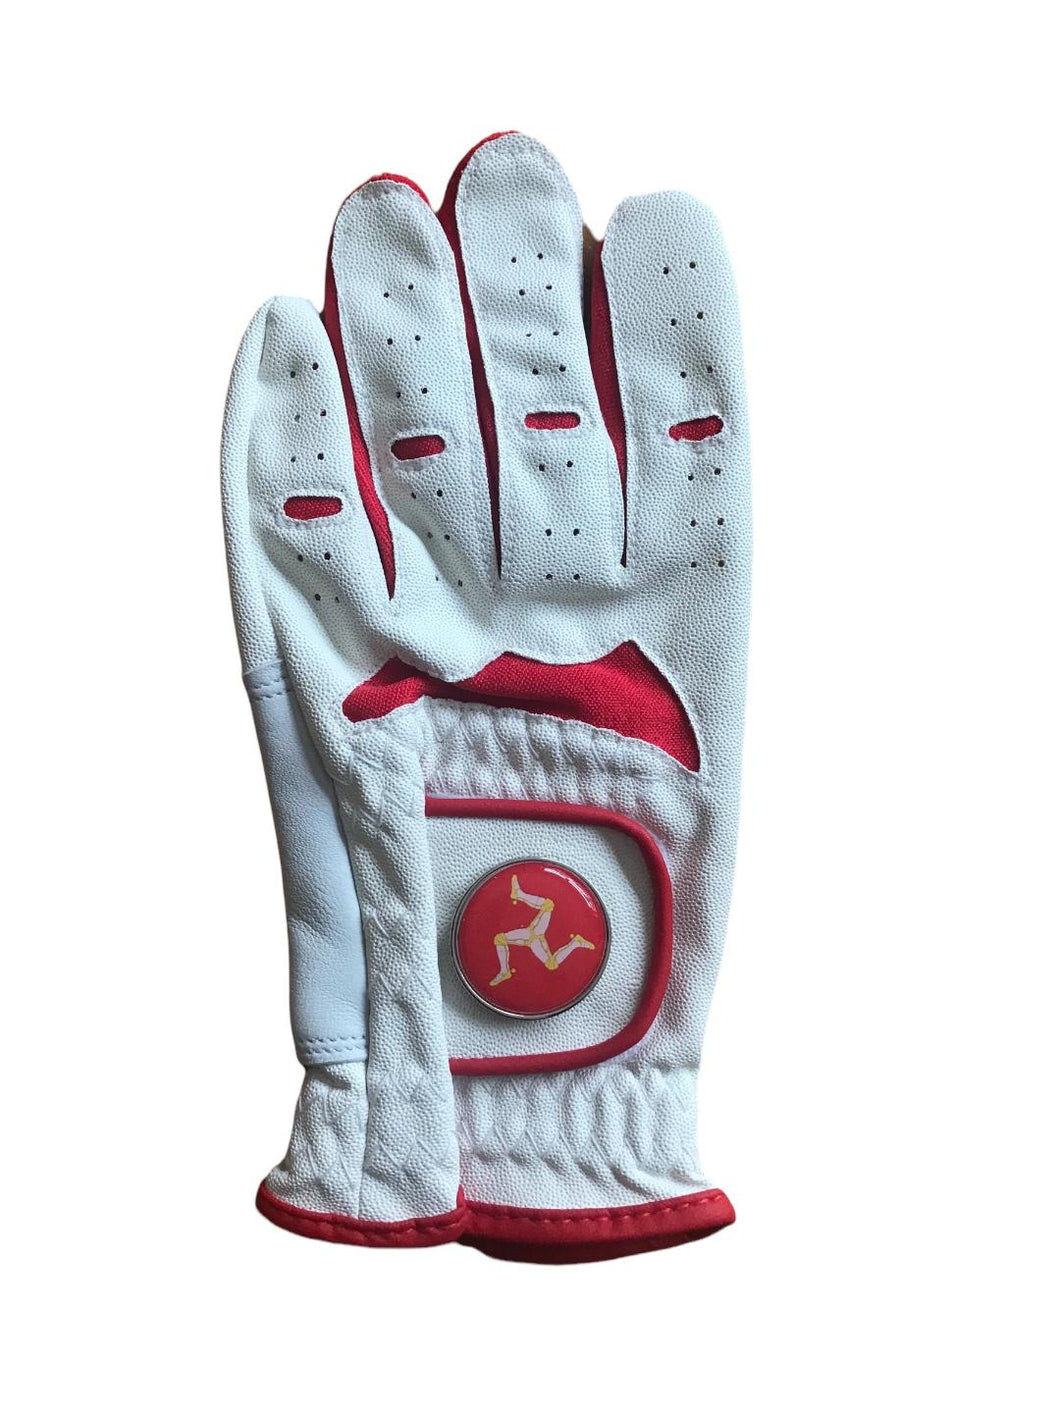 NEW Junior Red / White All Weather Golf Glove. Isle of Man Ball Marker. Small, Medium or Large.